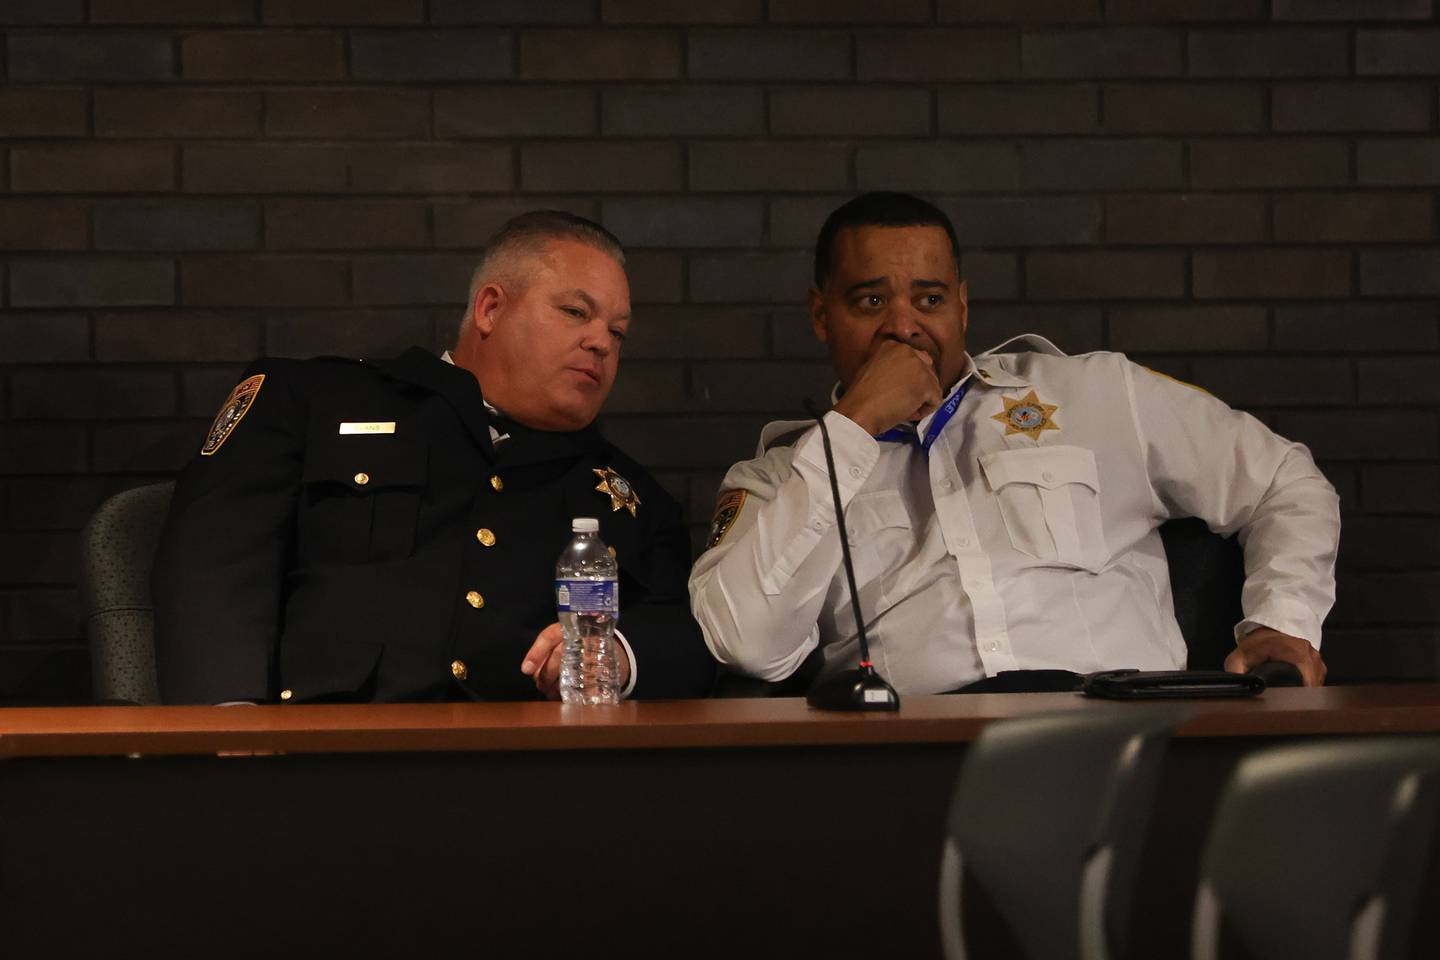 Joliet Police Chief William Evans talks with the former interim Joliet Police Chief Robert Brown at the Joliet City Council Meeting. Tuesday, Mar. 1, 2022, in Joliet.